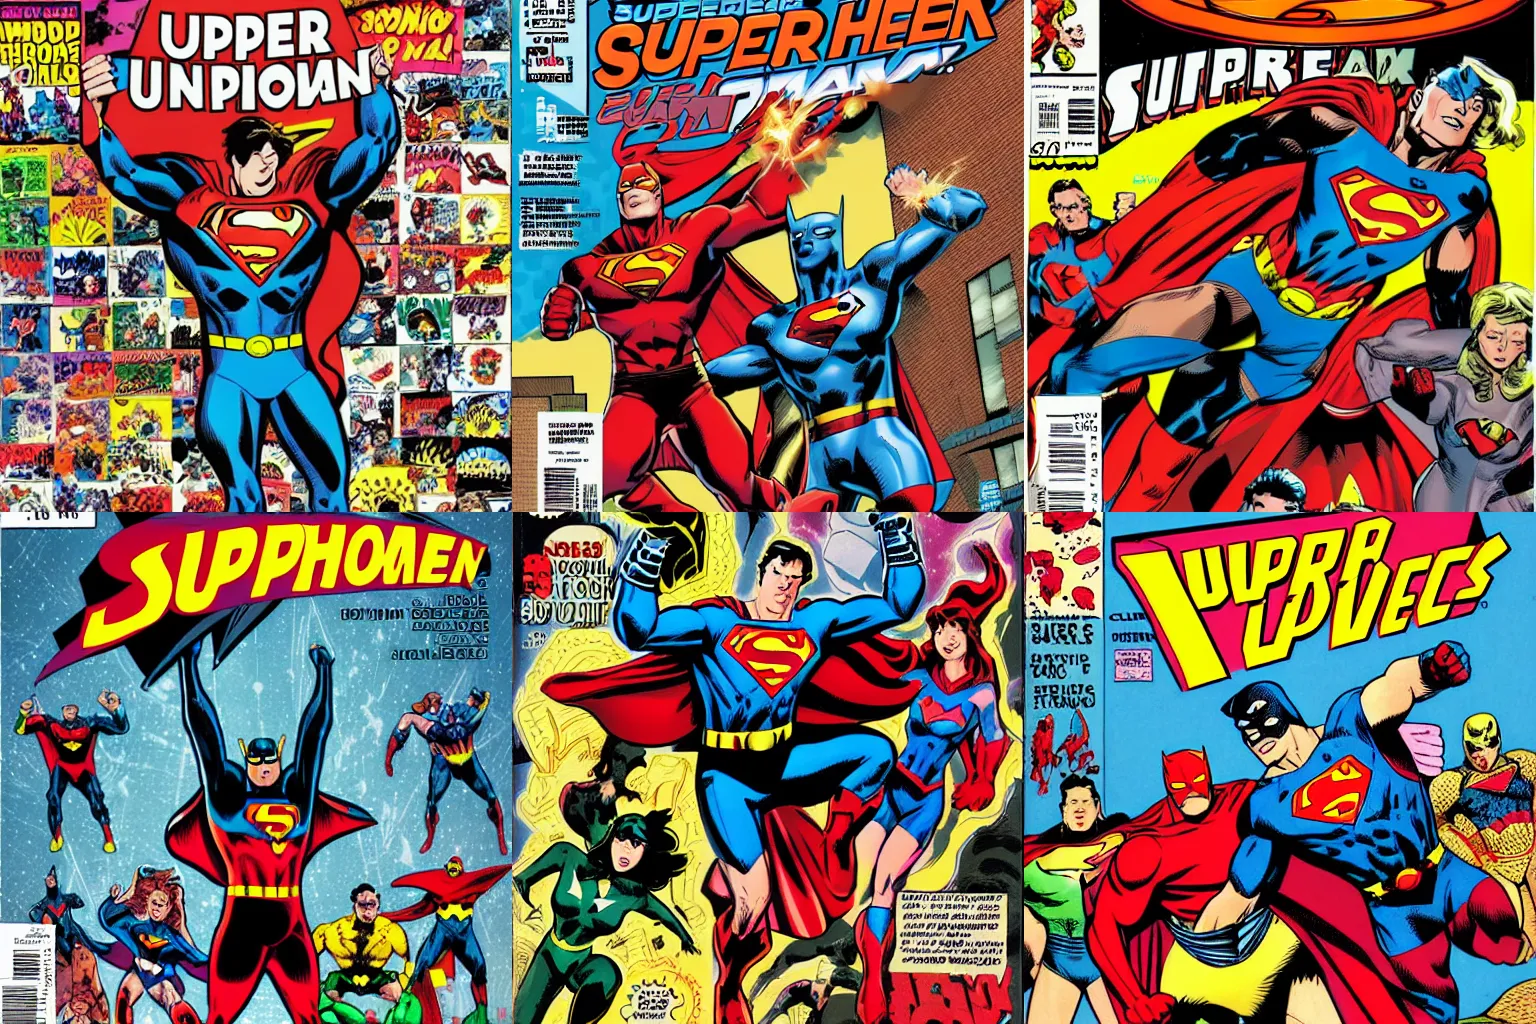 Prompt: superheros unite, stacked image, comic book cover